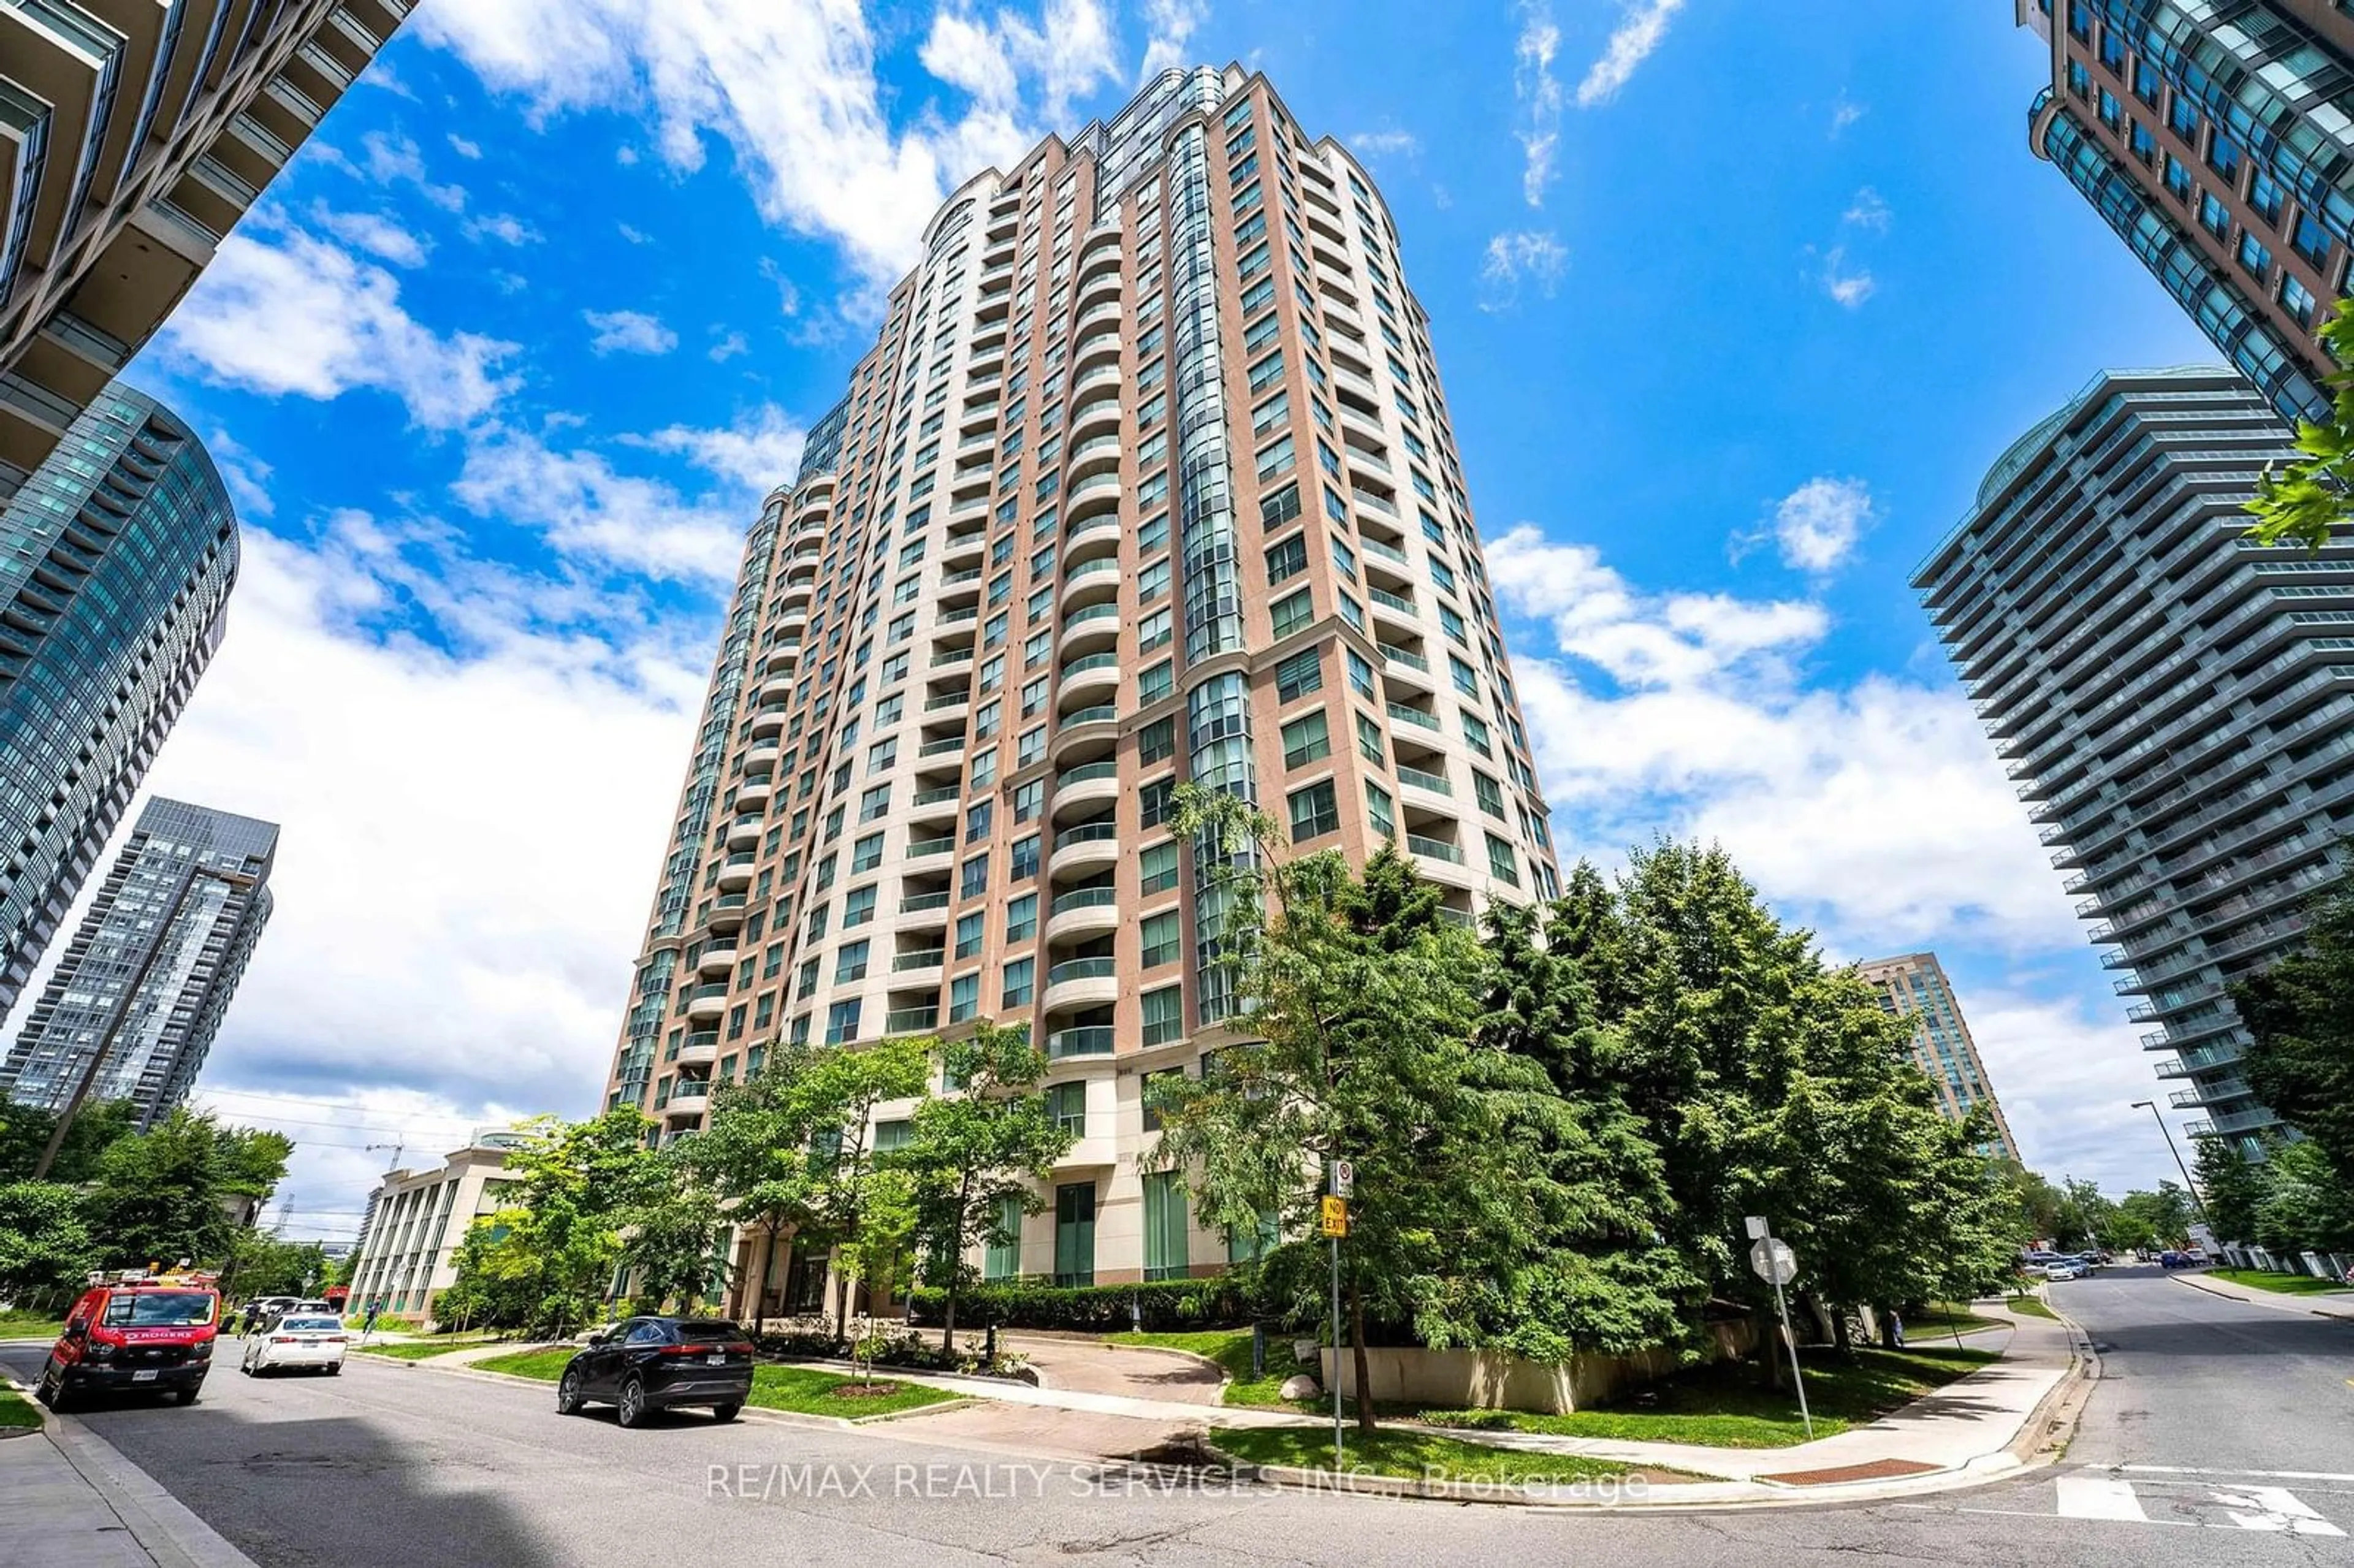 A pic from exterior of the house or condo for 7 Lorraine Dr #1207, Toronto Ontario M2N 7H2